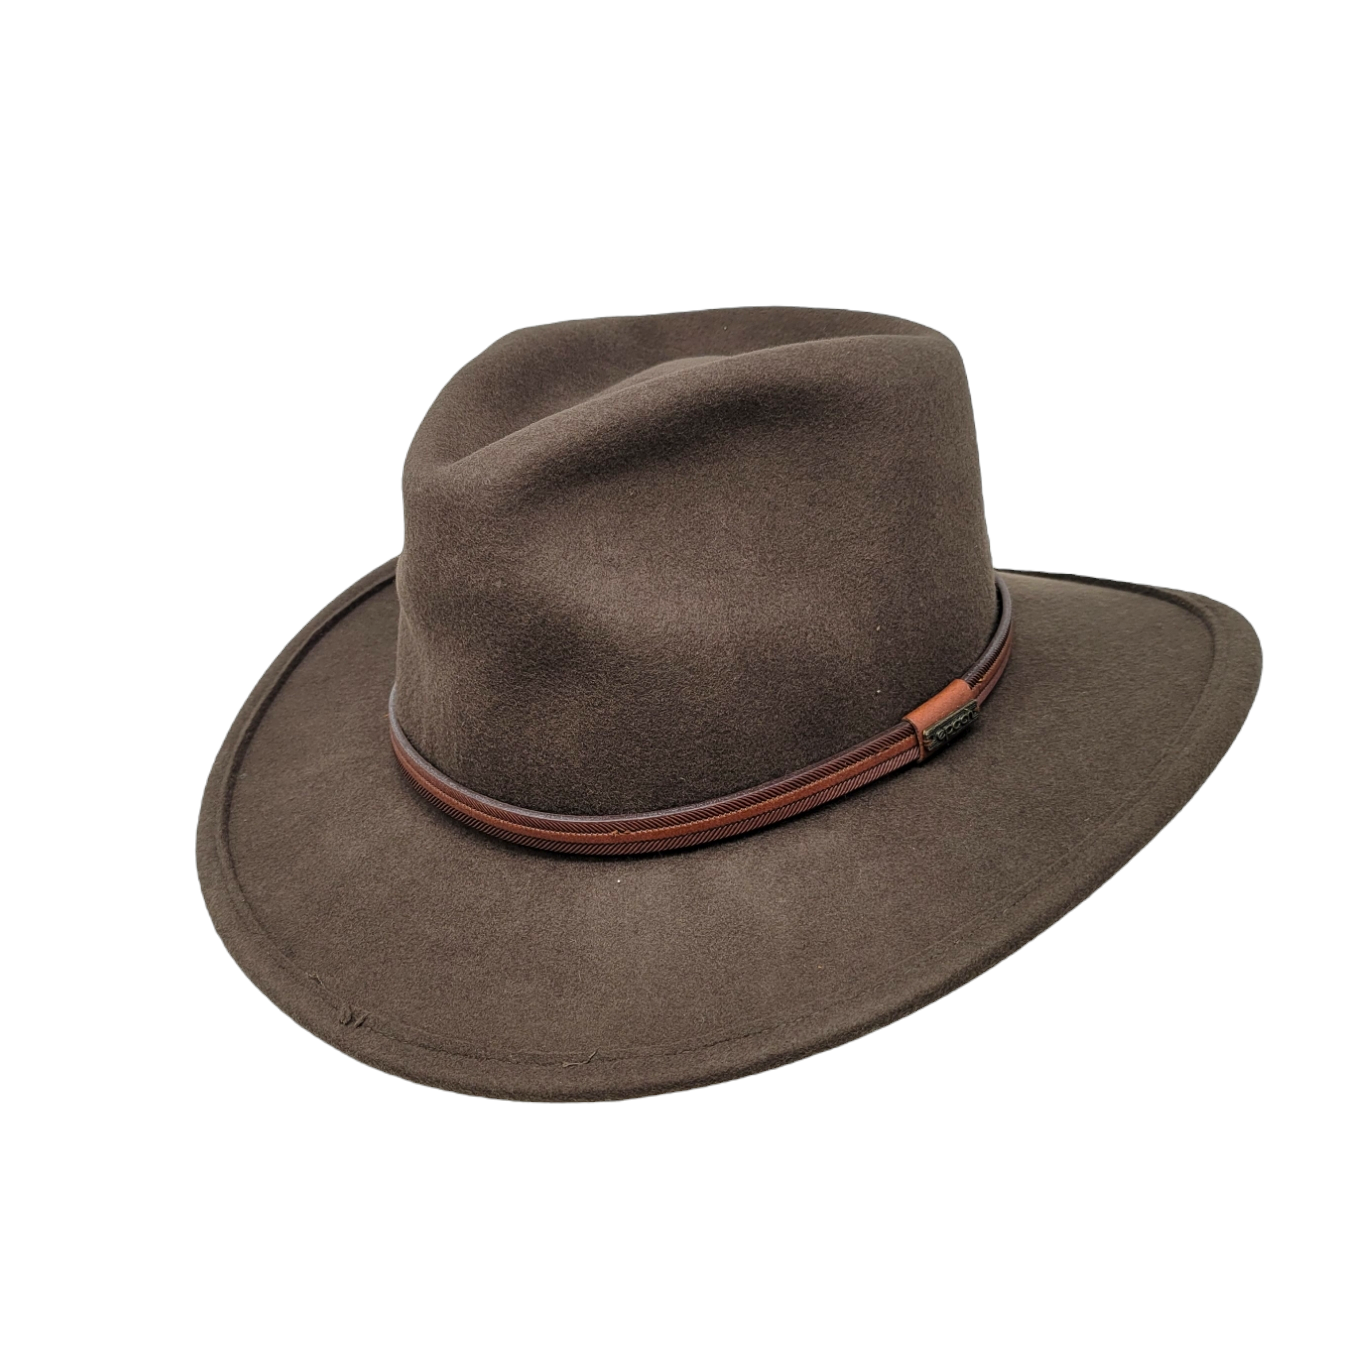 Epoch Men's Crushable Felt Outback Hat W/Leather Band